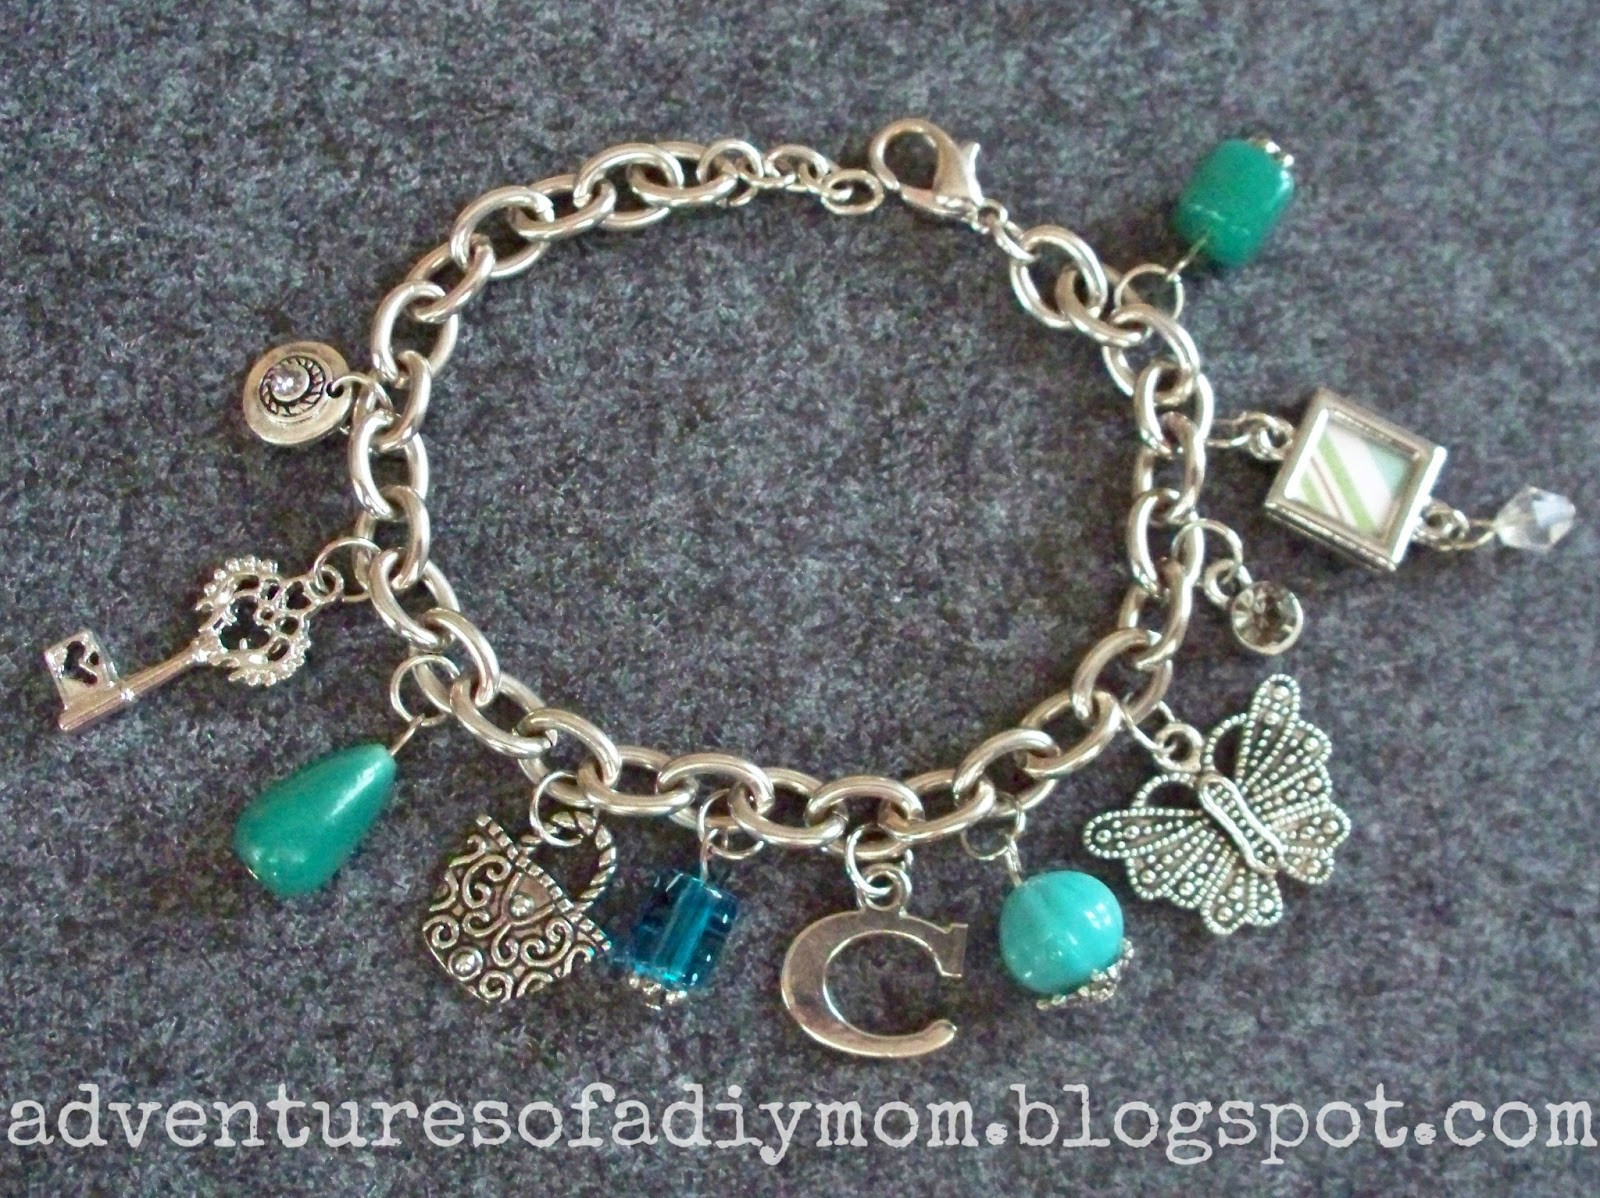 Best ideas about DIY Charms Bracelet
. Save or Pin How to Make Charm Bracelets Adventures of a DIY Mom Now.